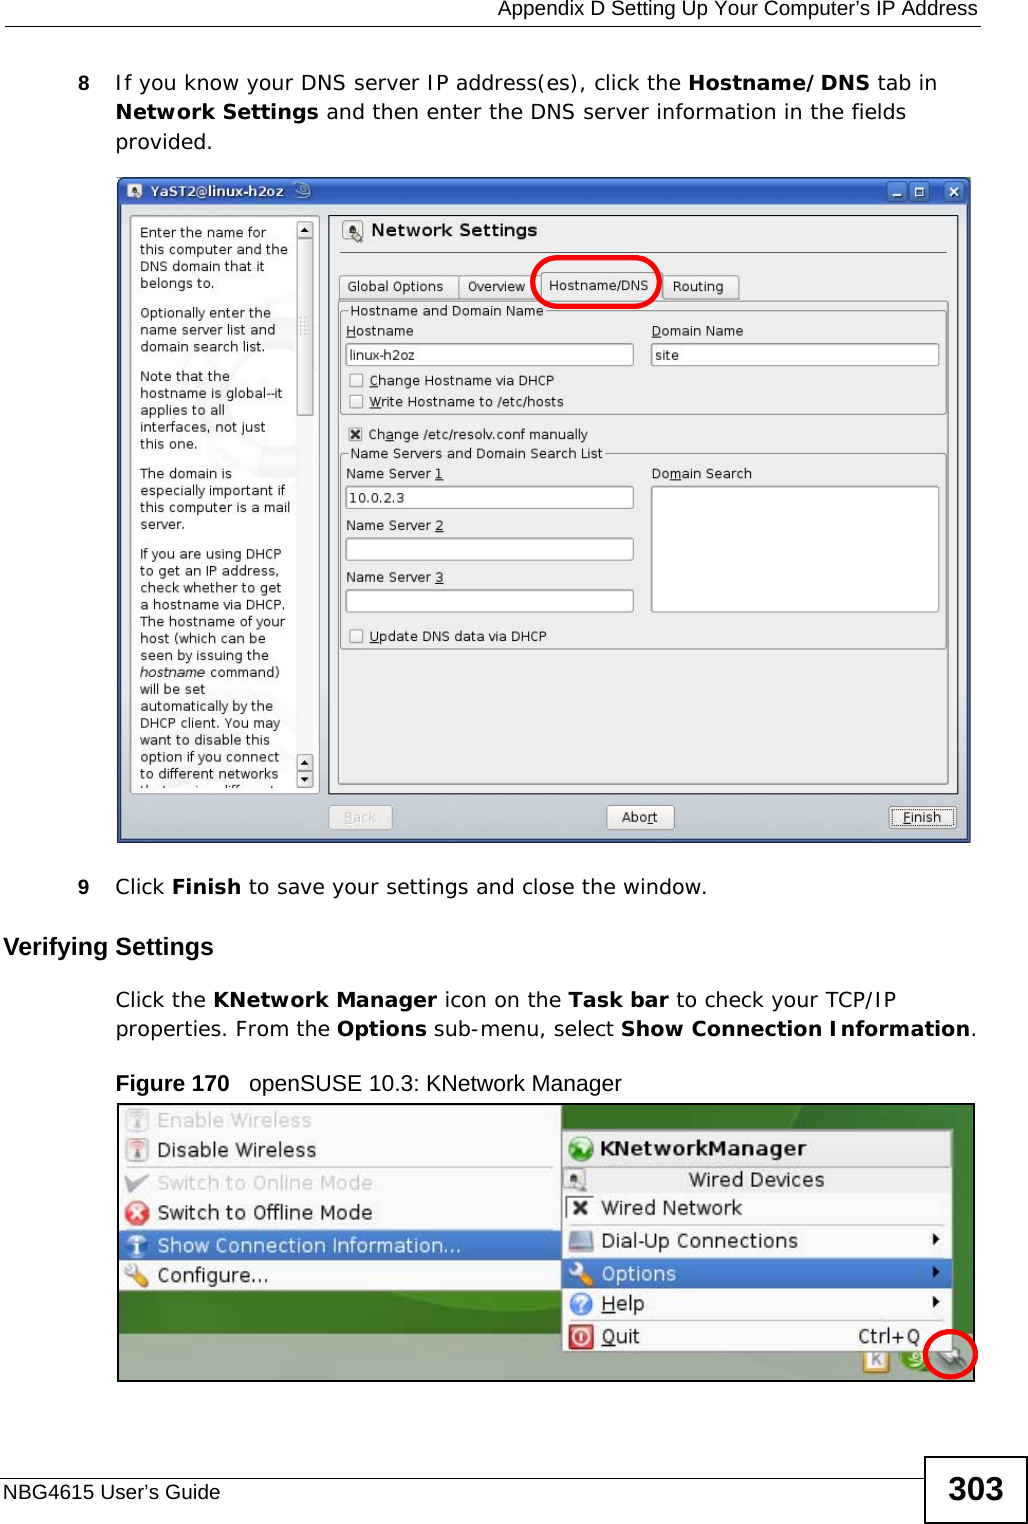  Appendix D Setting Up Your Computer’s IP AddressNBG4615 User’s Guide 3038If you know your DNS server IP address(es), click the Hostname/DNS tab in Network Settings and then enter the DNS server information in the fields provided.9Click Finish to save your settings and close the window.Verifying SettingsClick the KNetwork Manager icon on the Task bar to check your TCP/IP properties. From the Options sub-menu, select Show Connection Information.Figure 170   openSUSE 10.3: KNetwork Manager